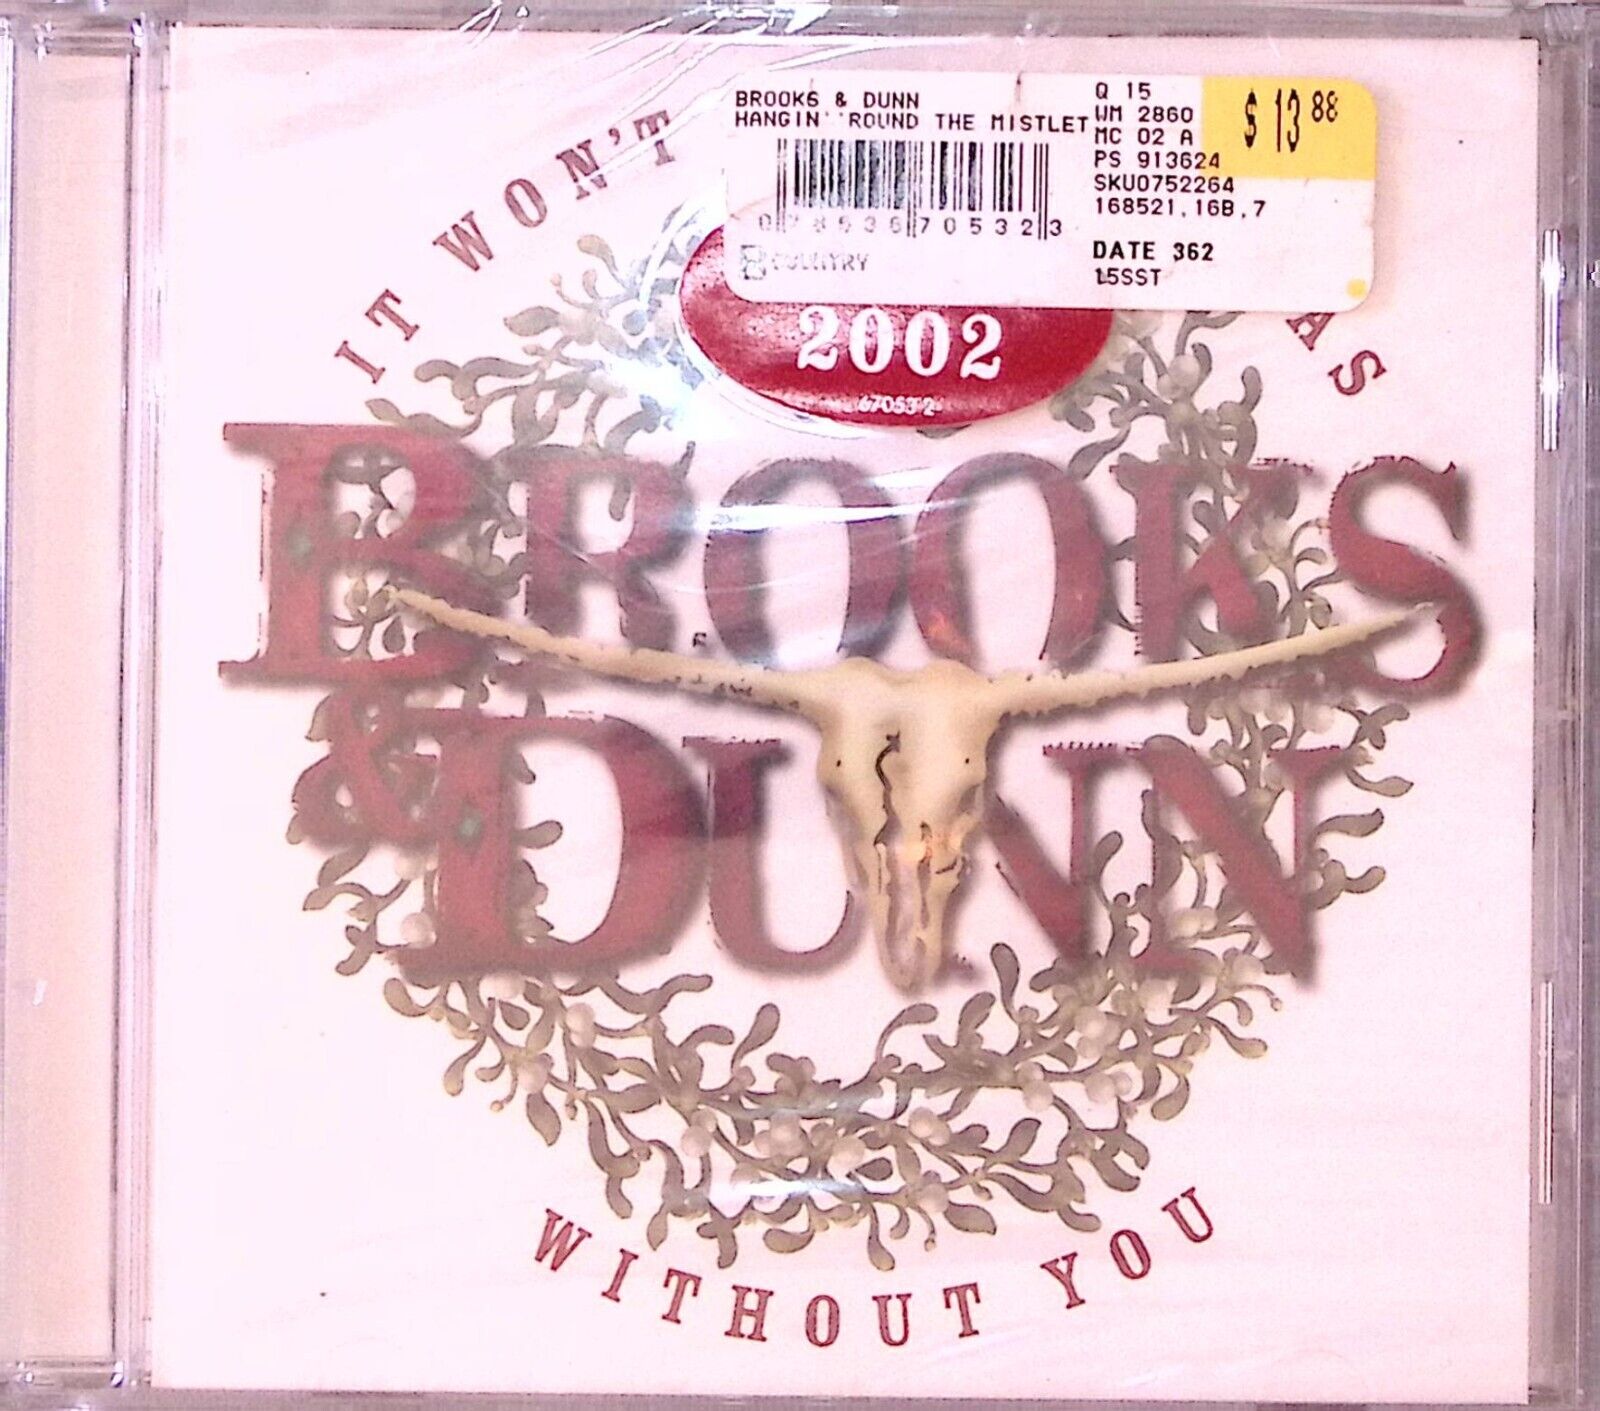 BROOKS & DUNN  IT WON'T BE CHRISTMAS WITHOUT YOU  SEALED  ARISTA CD 2516